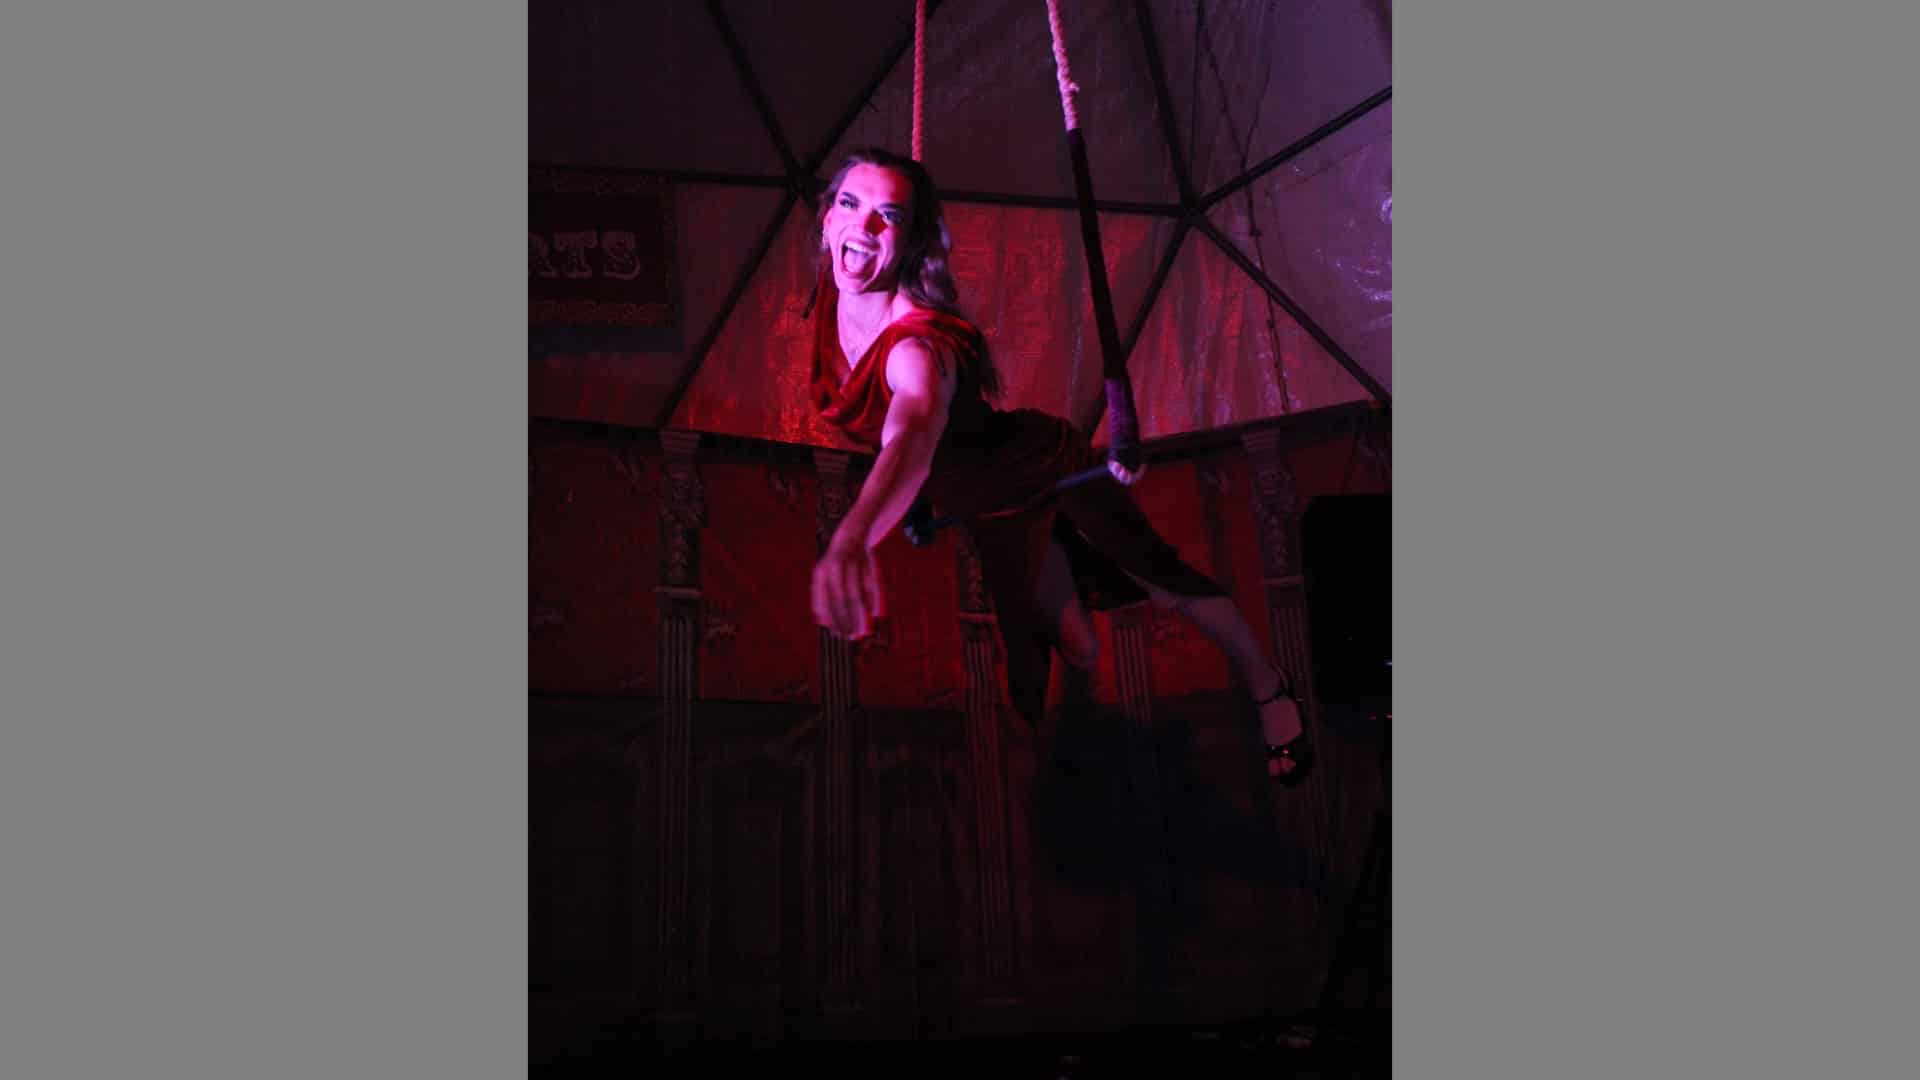 A woman swinging on a trapeze reaches out to the viewer